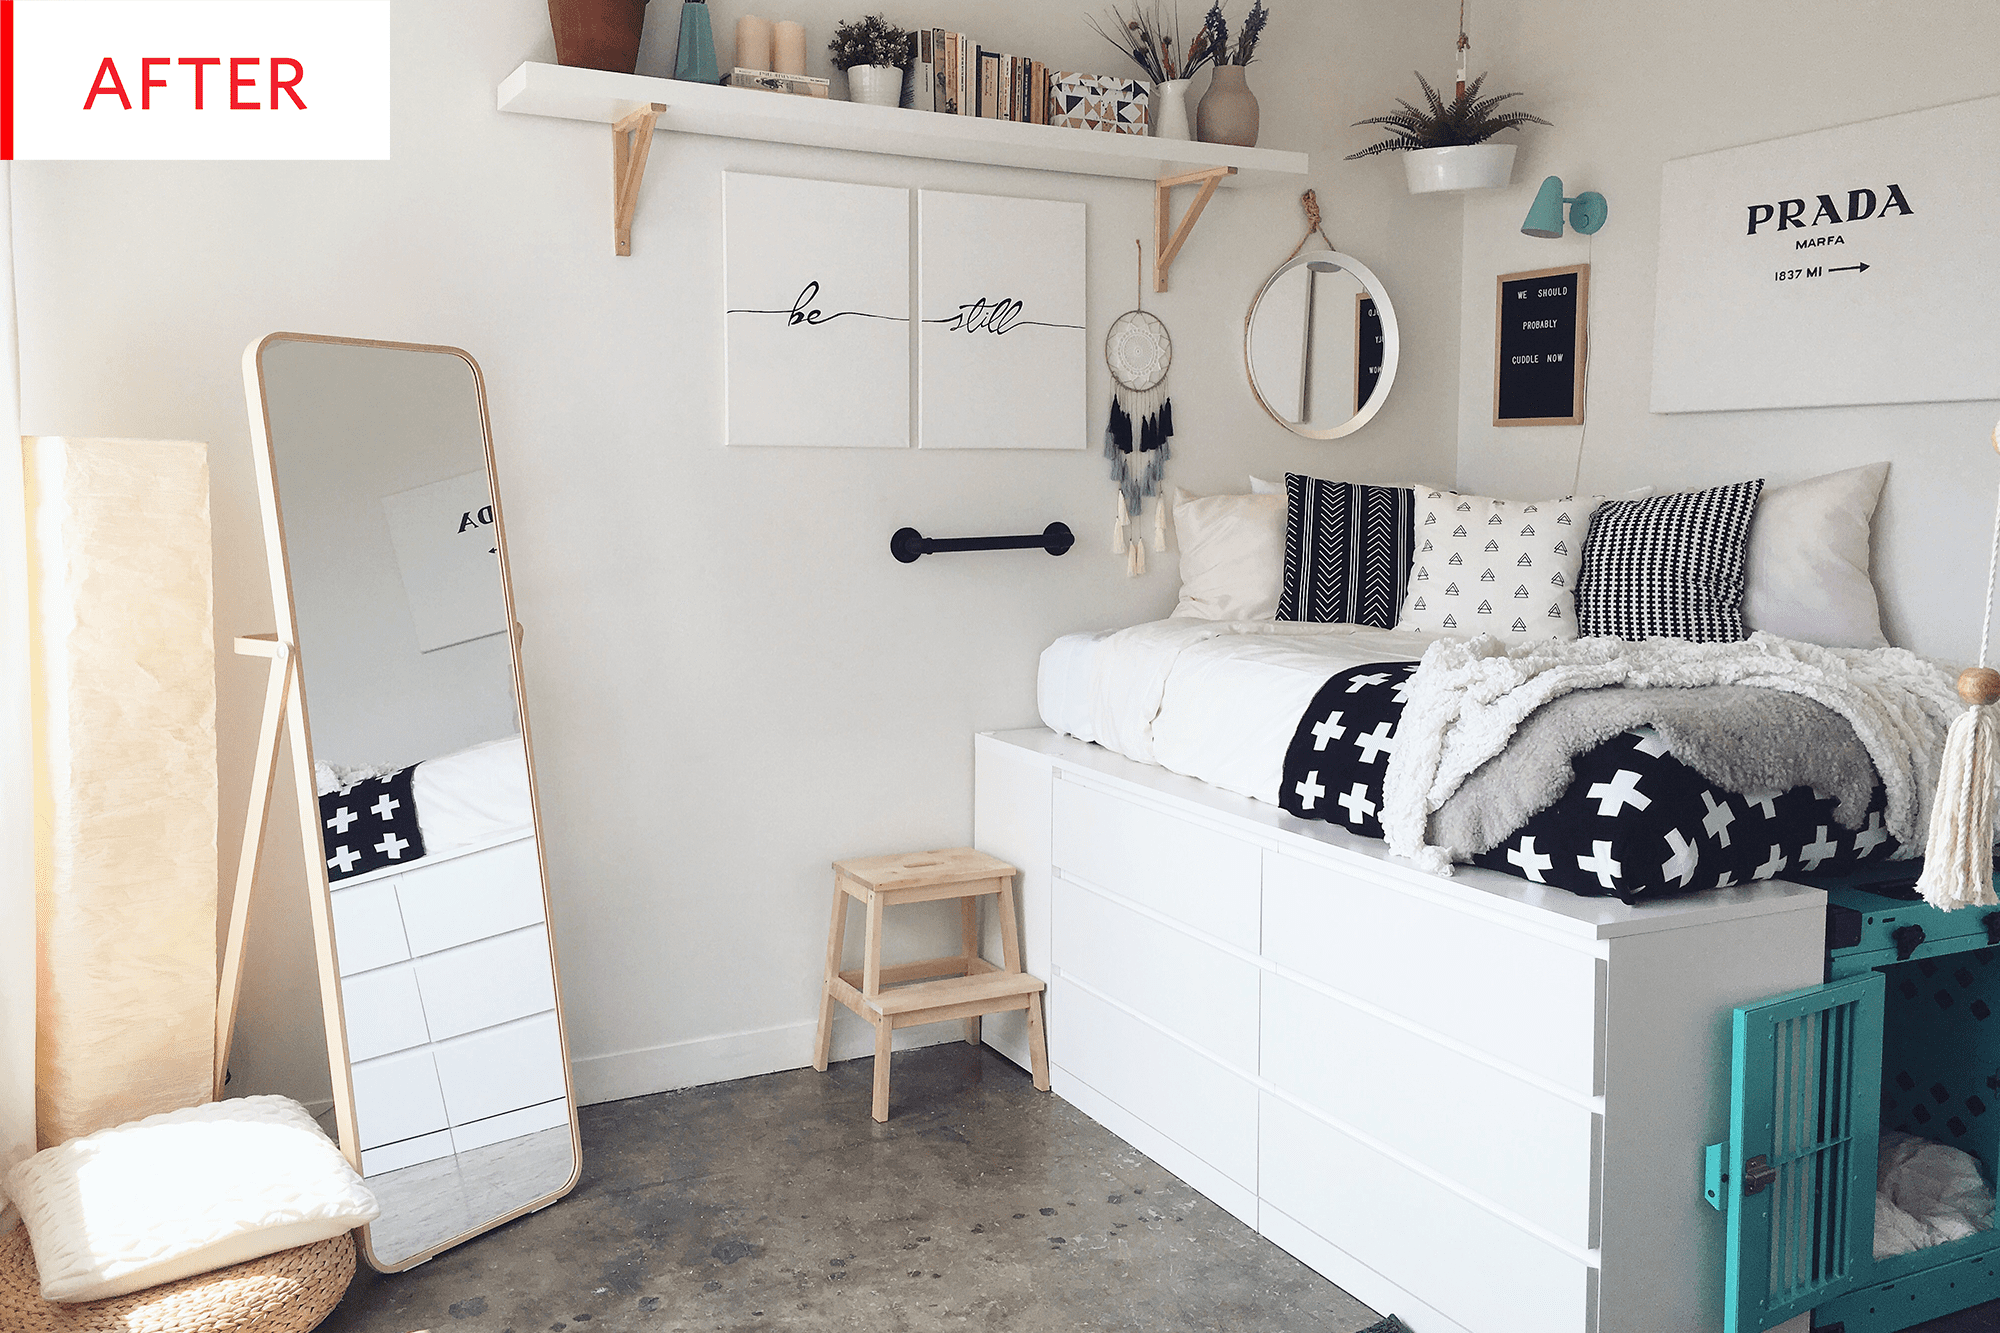 How To Stop Bed From Sliding DIY: 15 Easy Ways